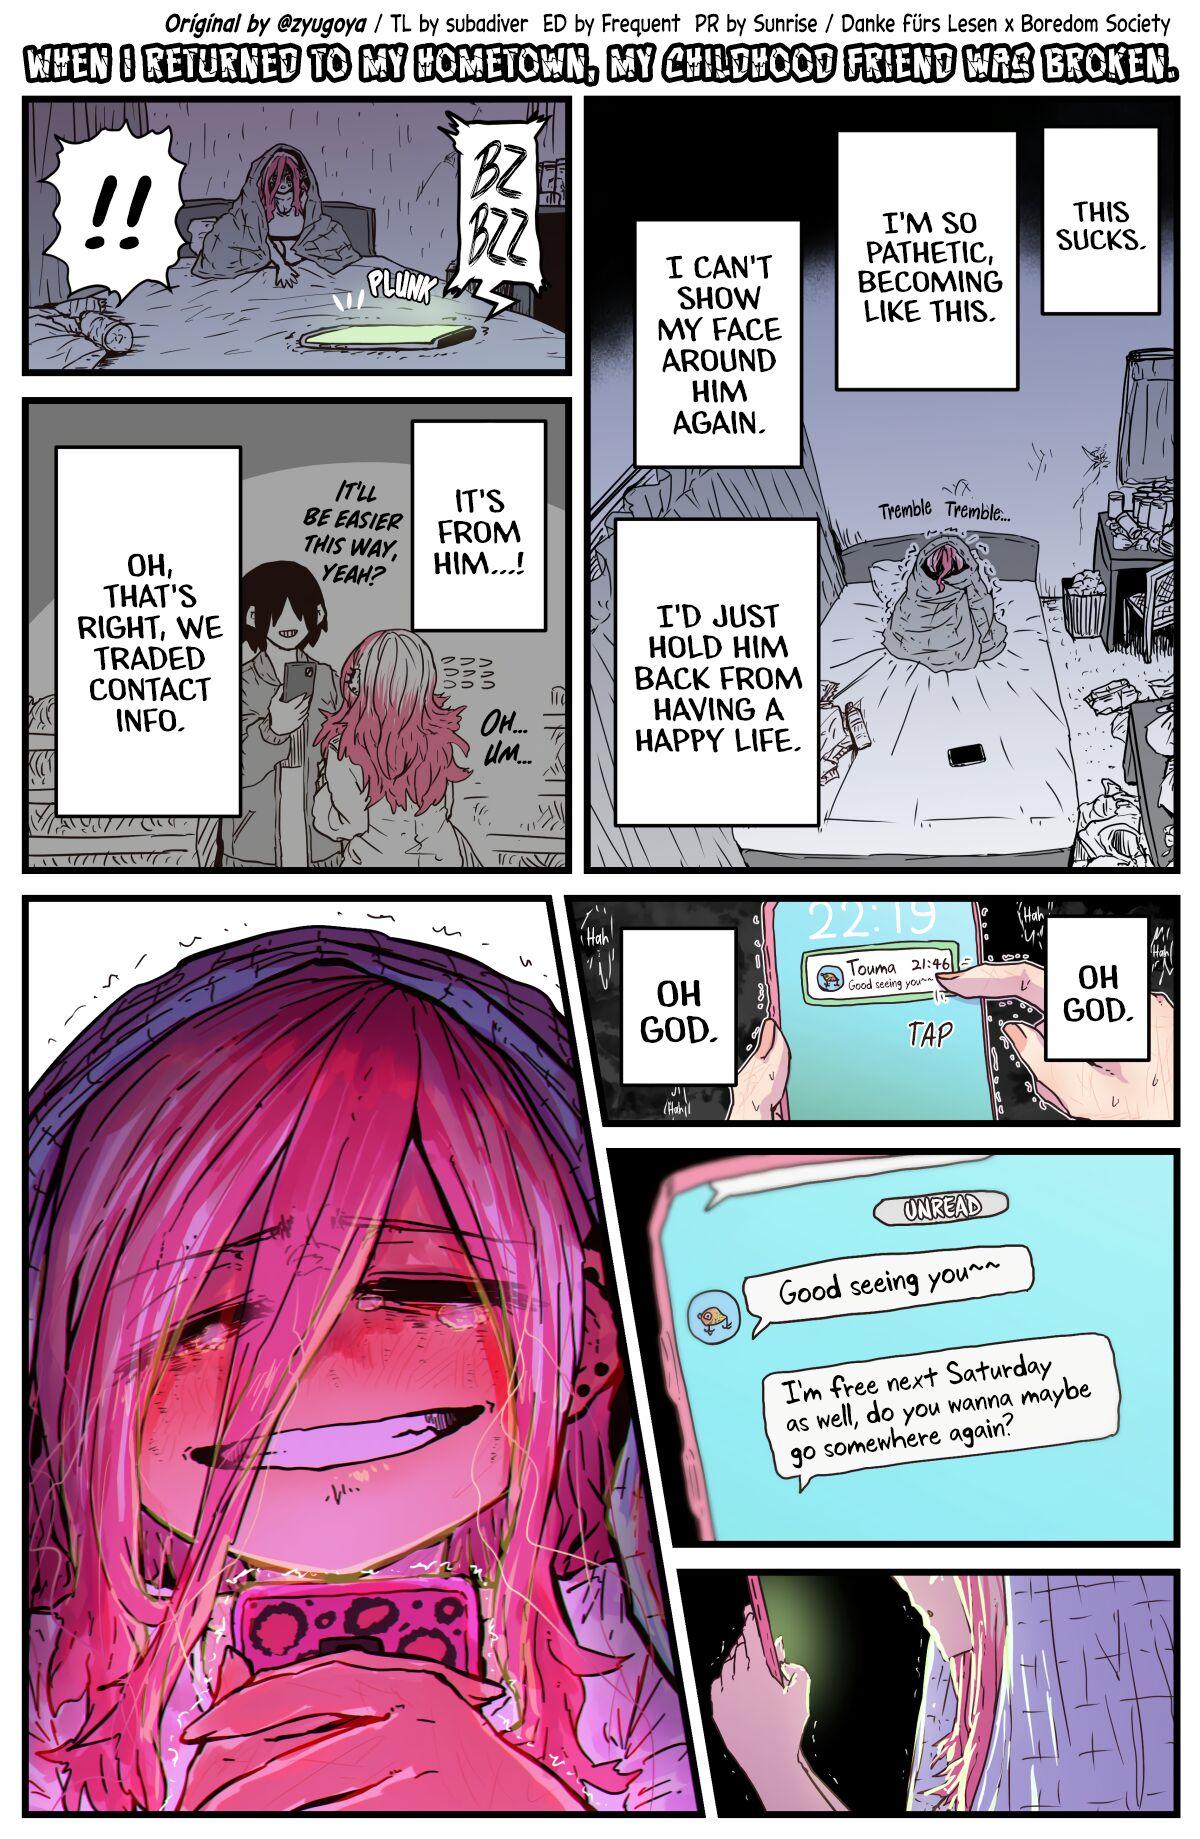 Mmf When I Returned to My Hometown, My Childhood Friend was Broken - Original Amatoriale - Page 12